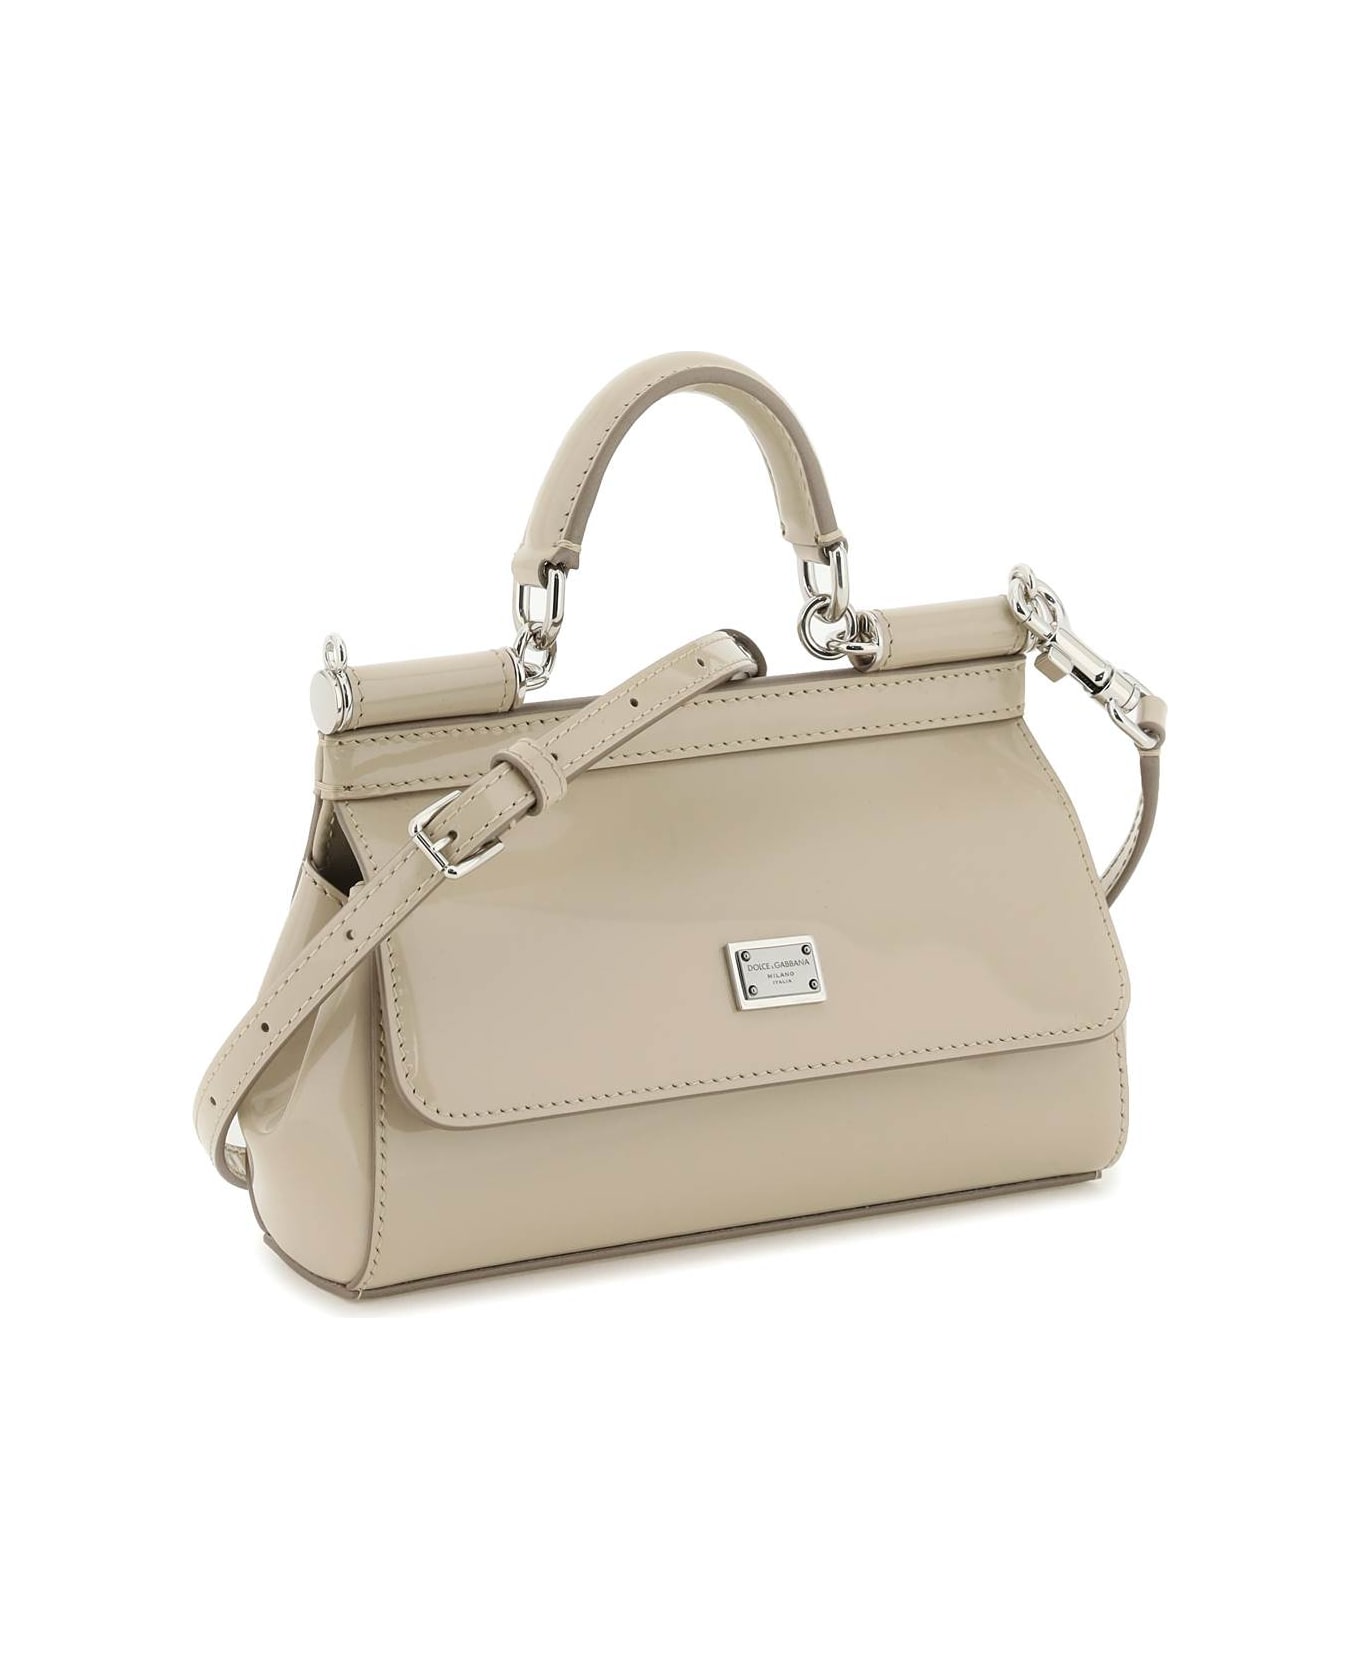 Dolce & Gabbana Patent Leather Small 'sicily' Bag - Beige